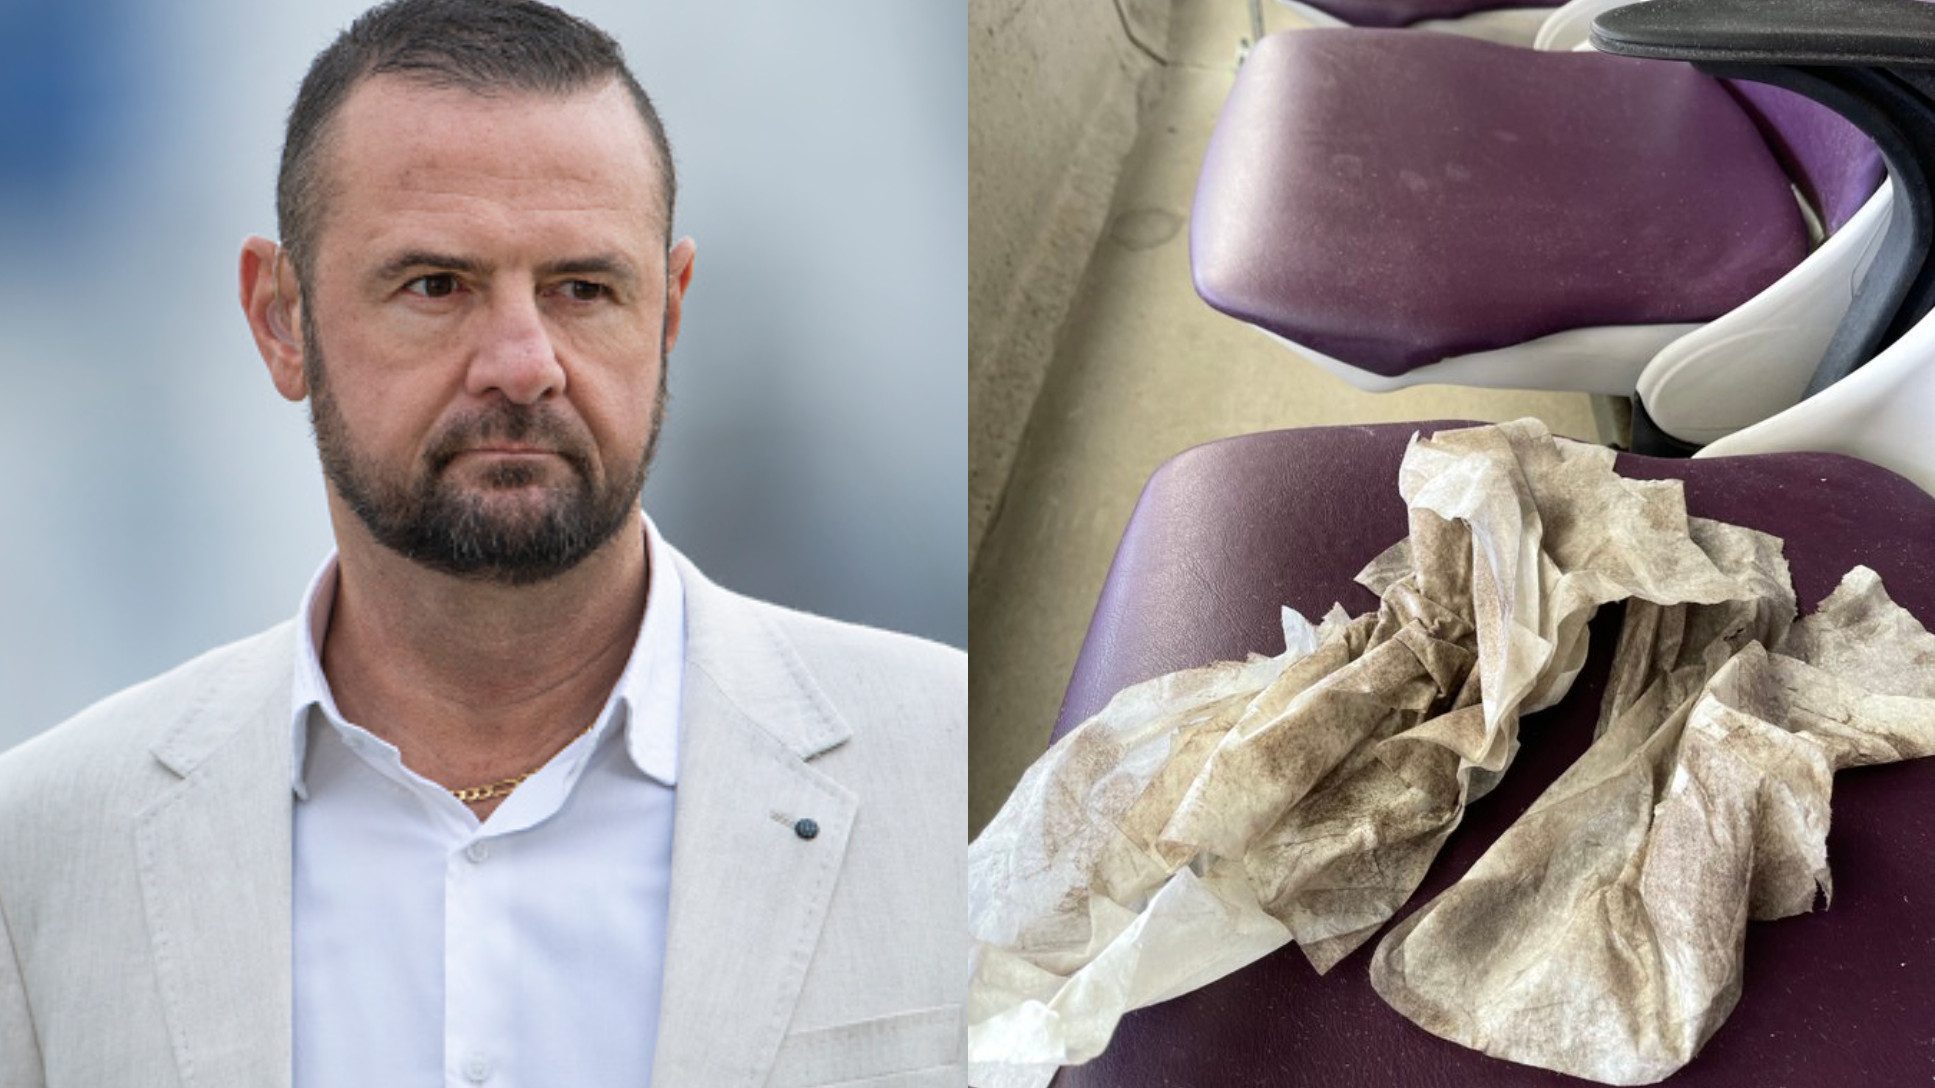 NZ v IND 2022: “Cleaned all seats in comm box for overseas guests”- Simon Doull slams Sky Stadium for dirty seats